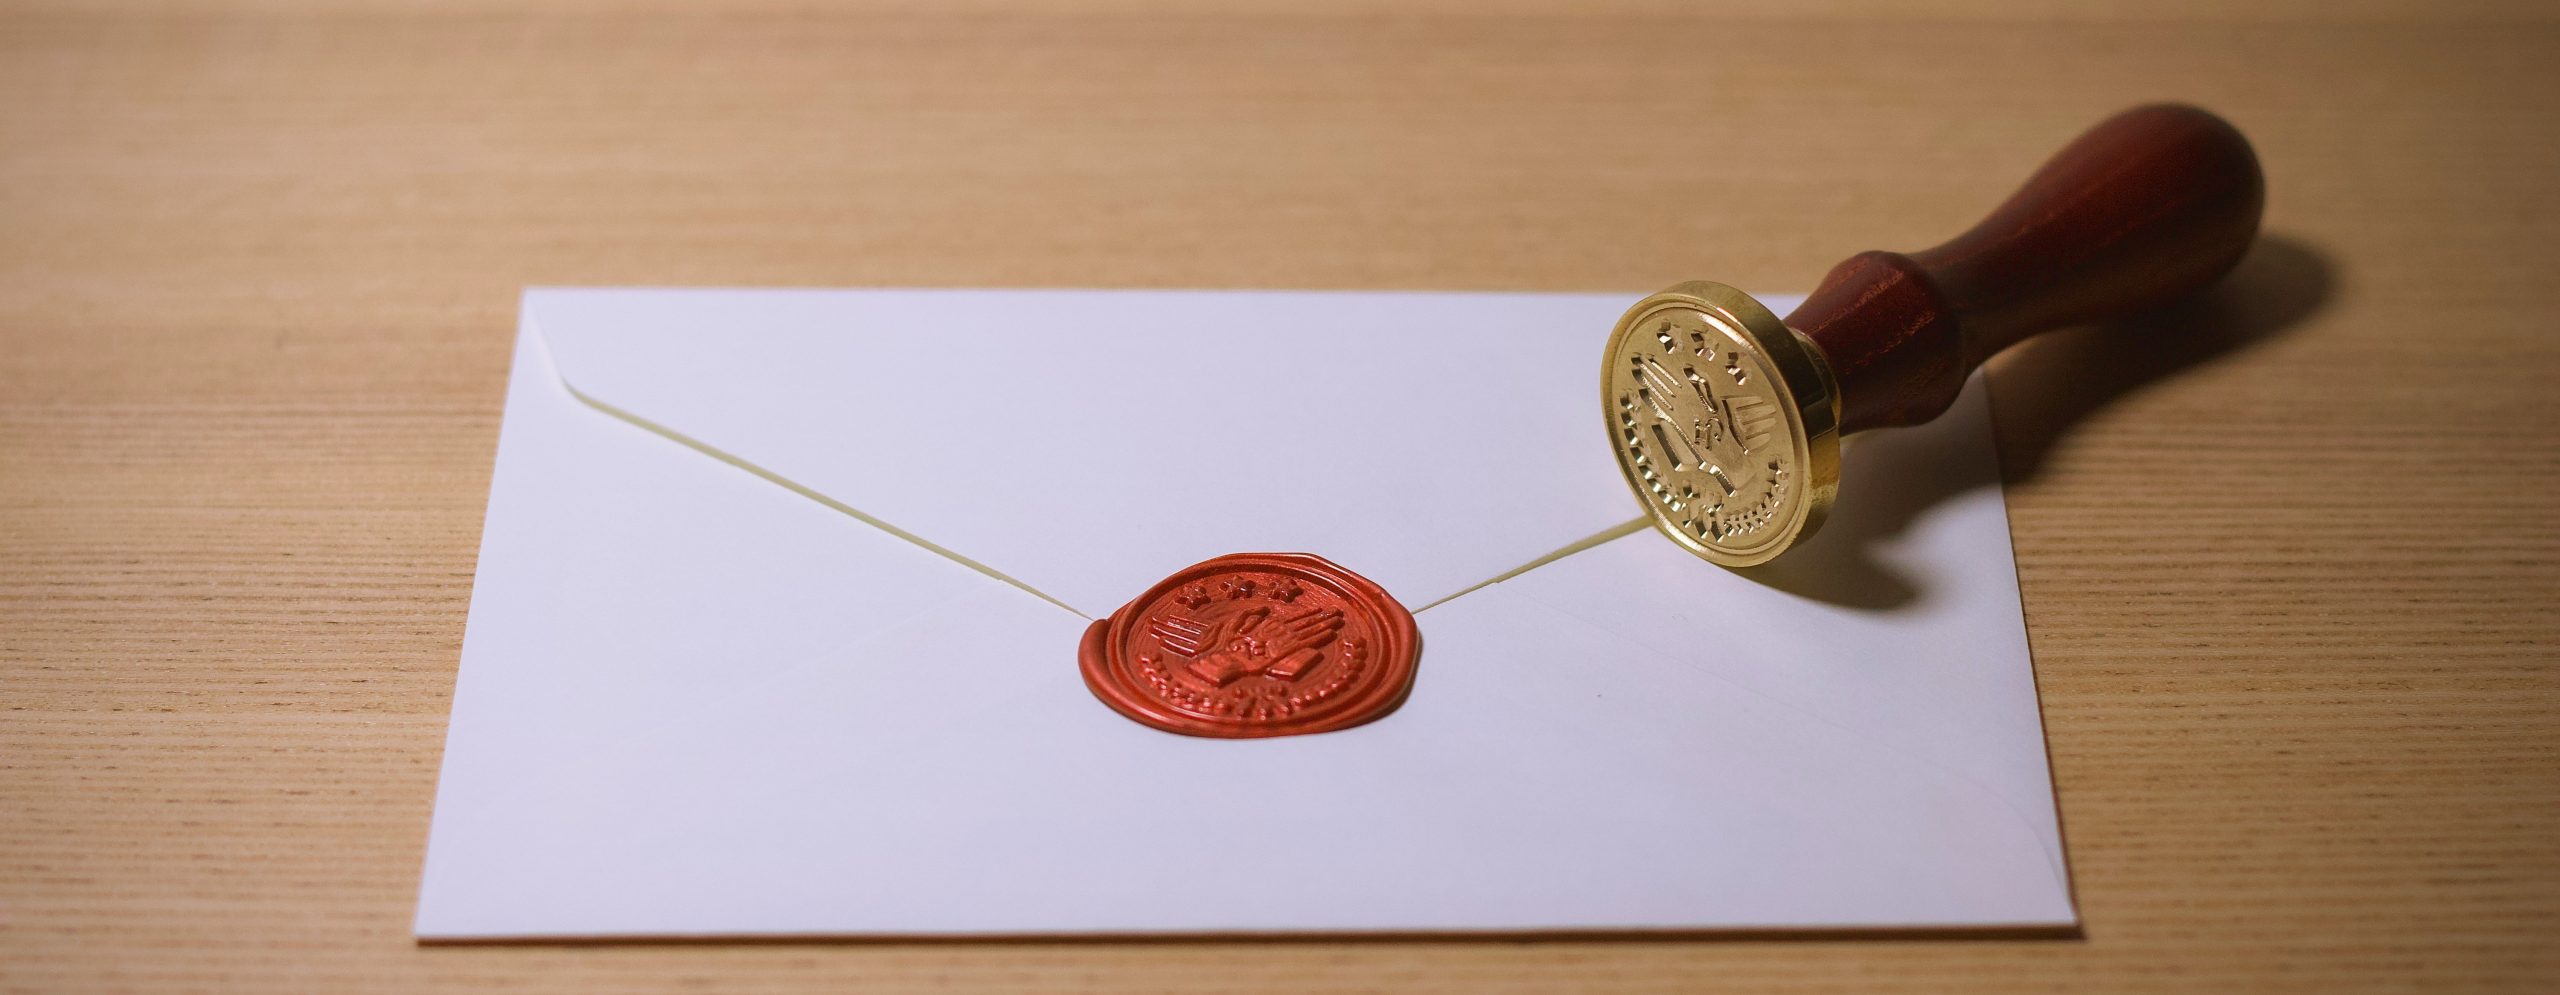 A closed envelope sealed with wax. Indicating something that it to be kept private and secure until the time that it is needed.